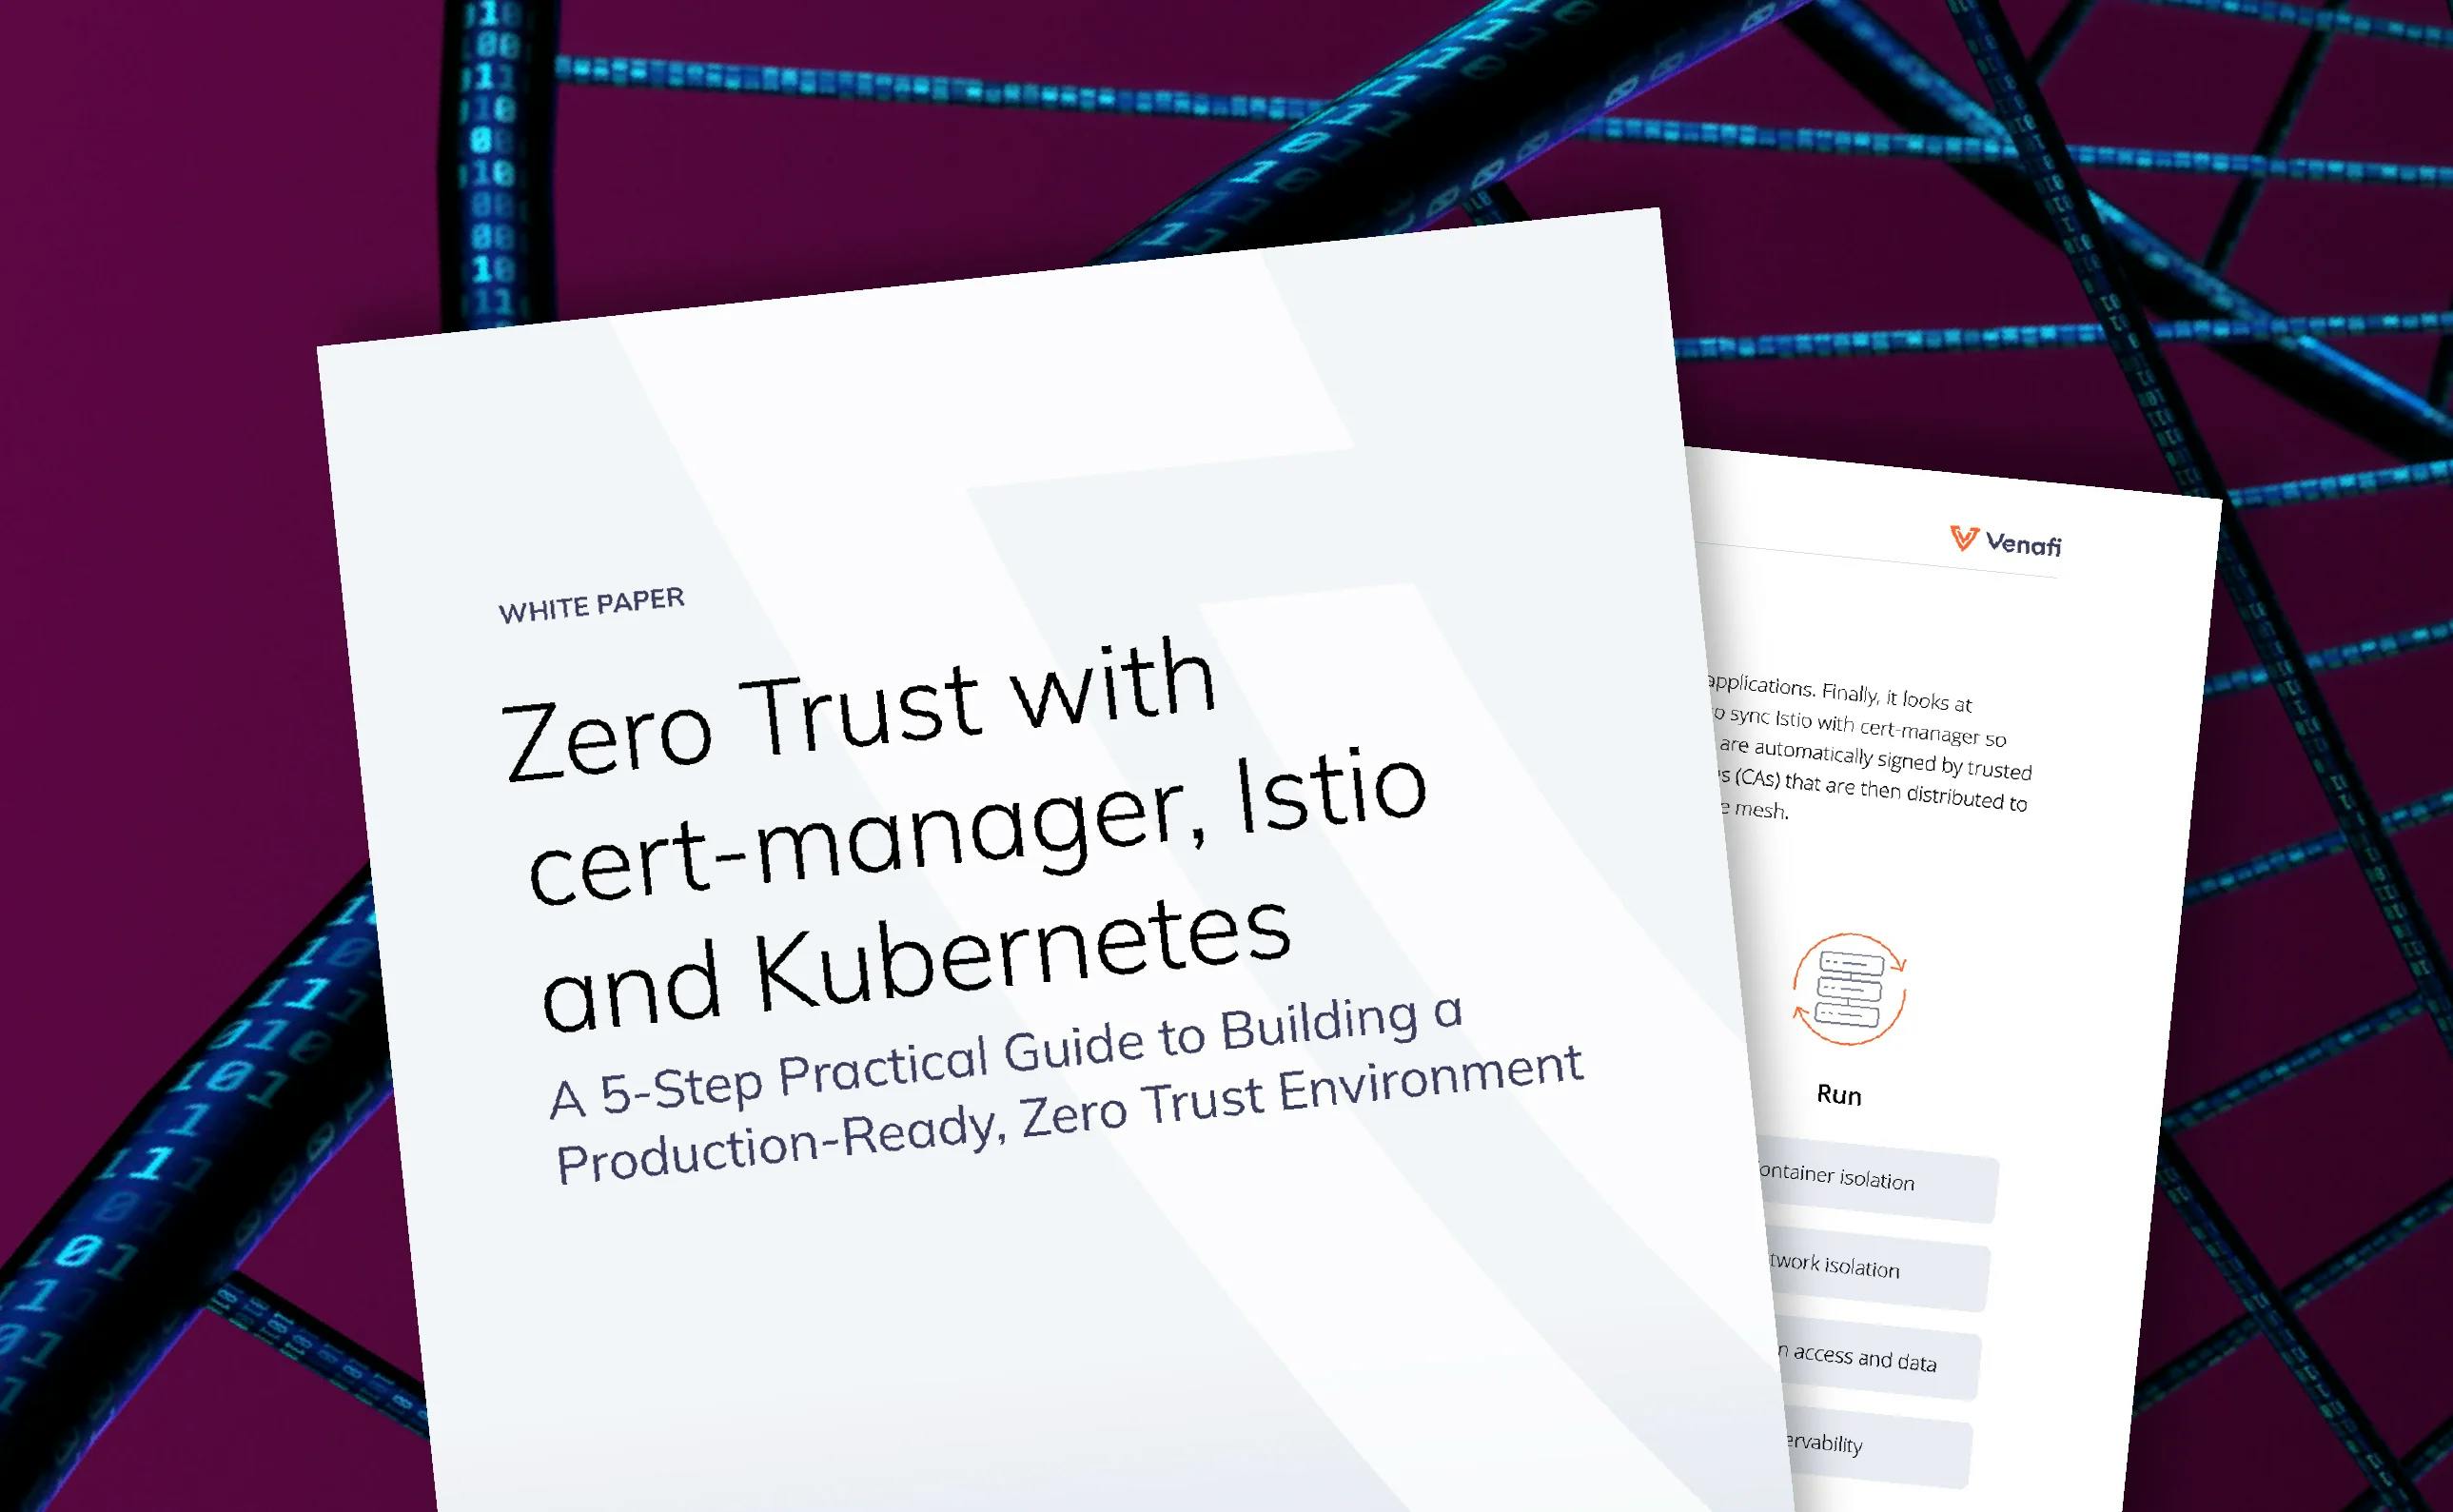 Zero Trust with cert-manager, Istio and Kubernetes